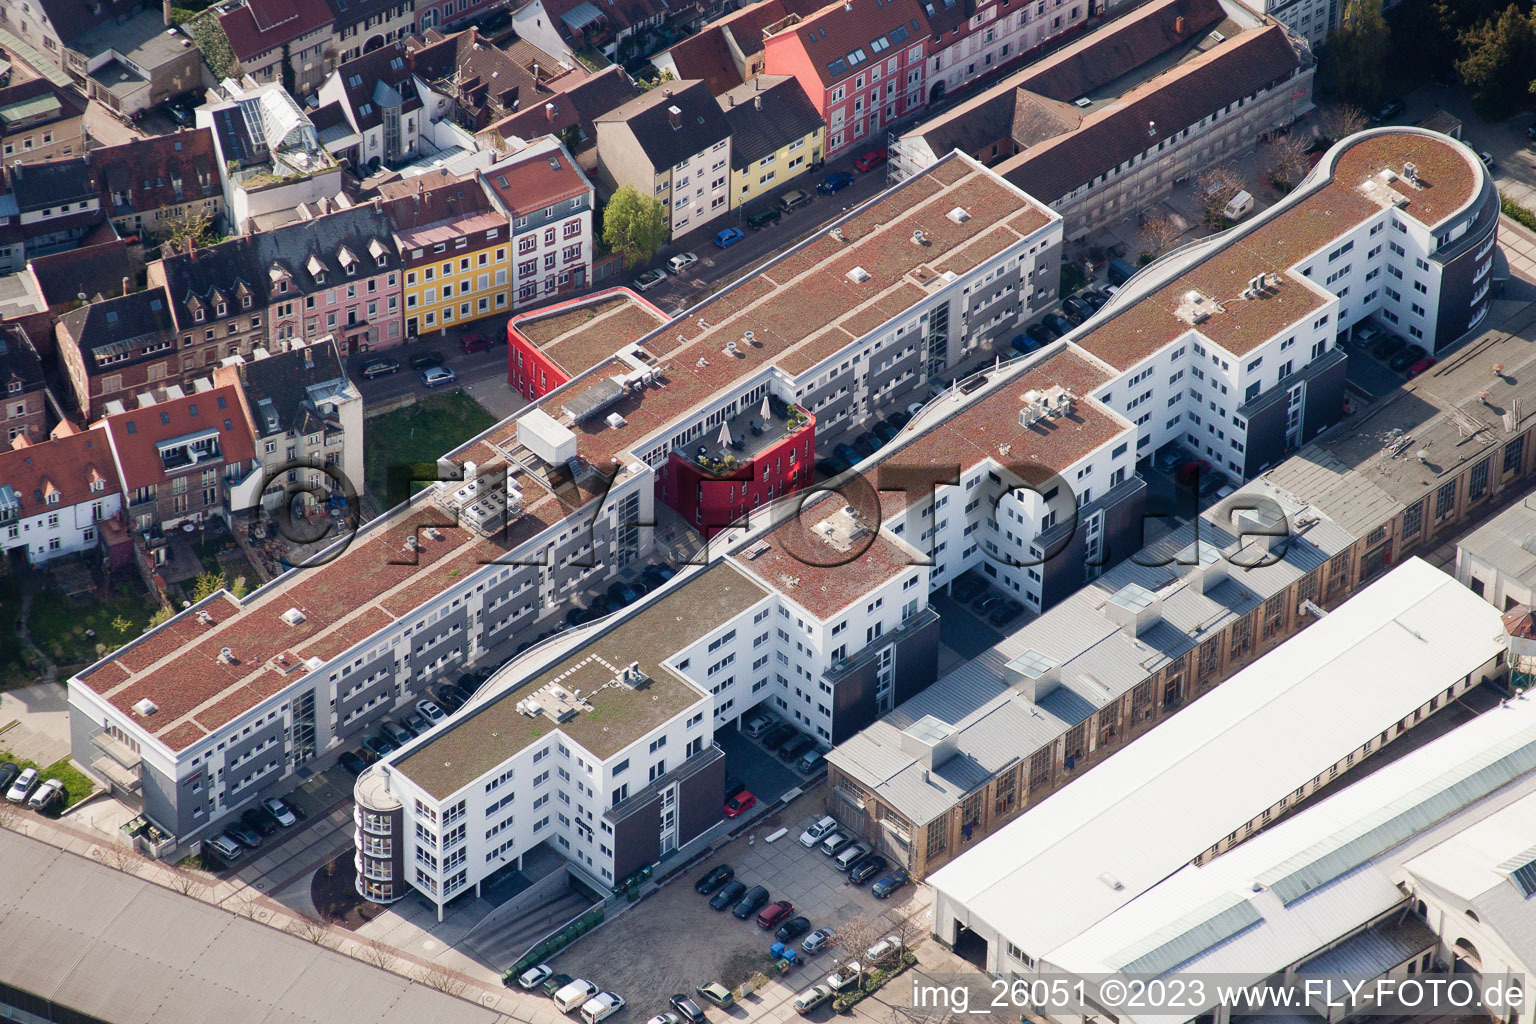 Aerial photograpy of To the foundry in the district Durlach in Karlsruhe in the state Baden-Wuerttemberg, Germany